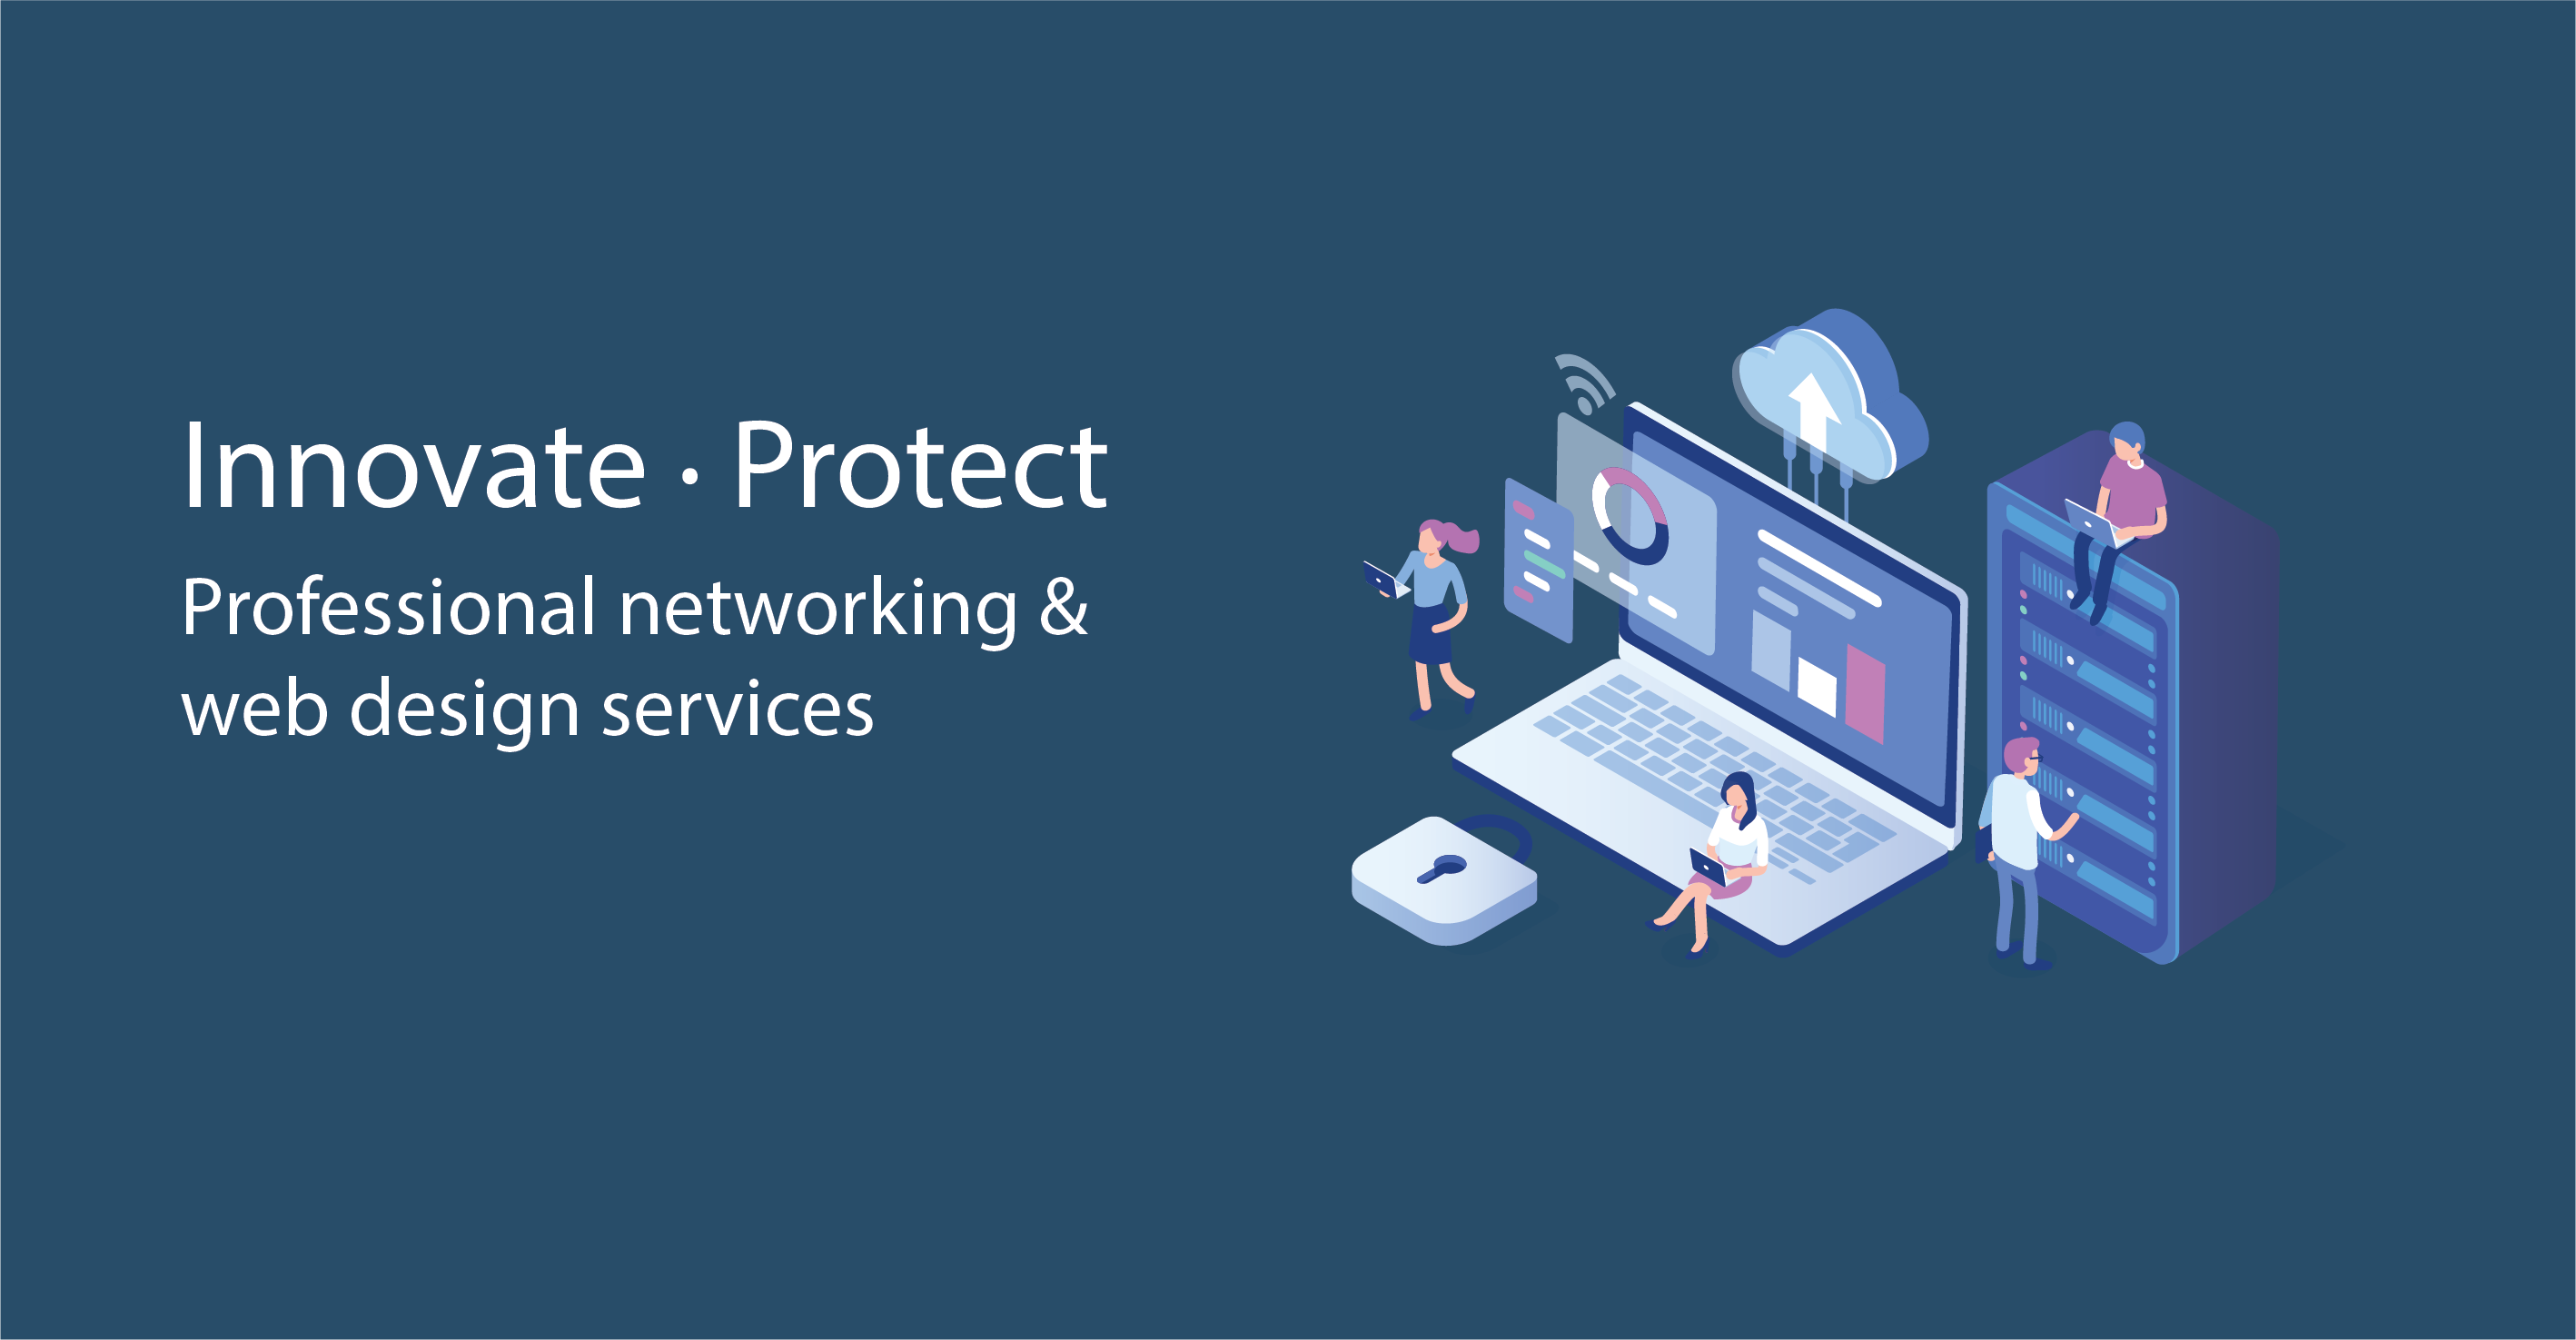 Image of computer and network security with the heading 'Innovate • Protect. Professional networking &
web design services'.